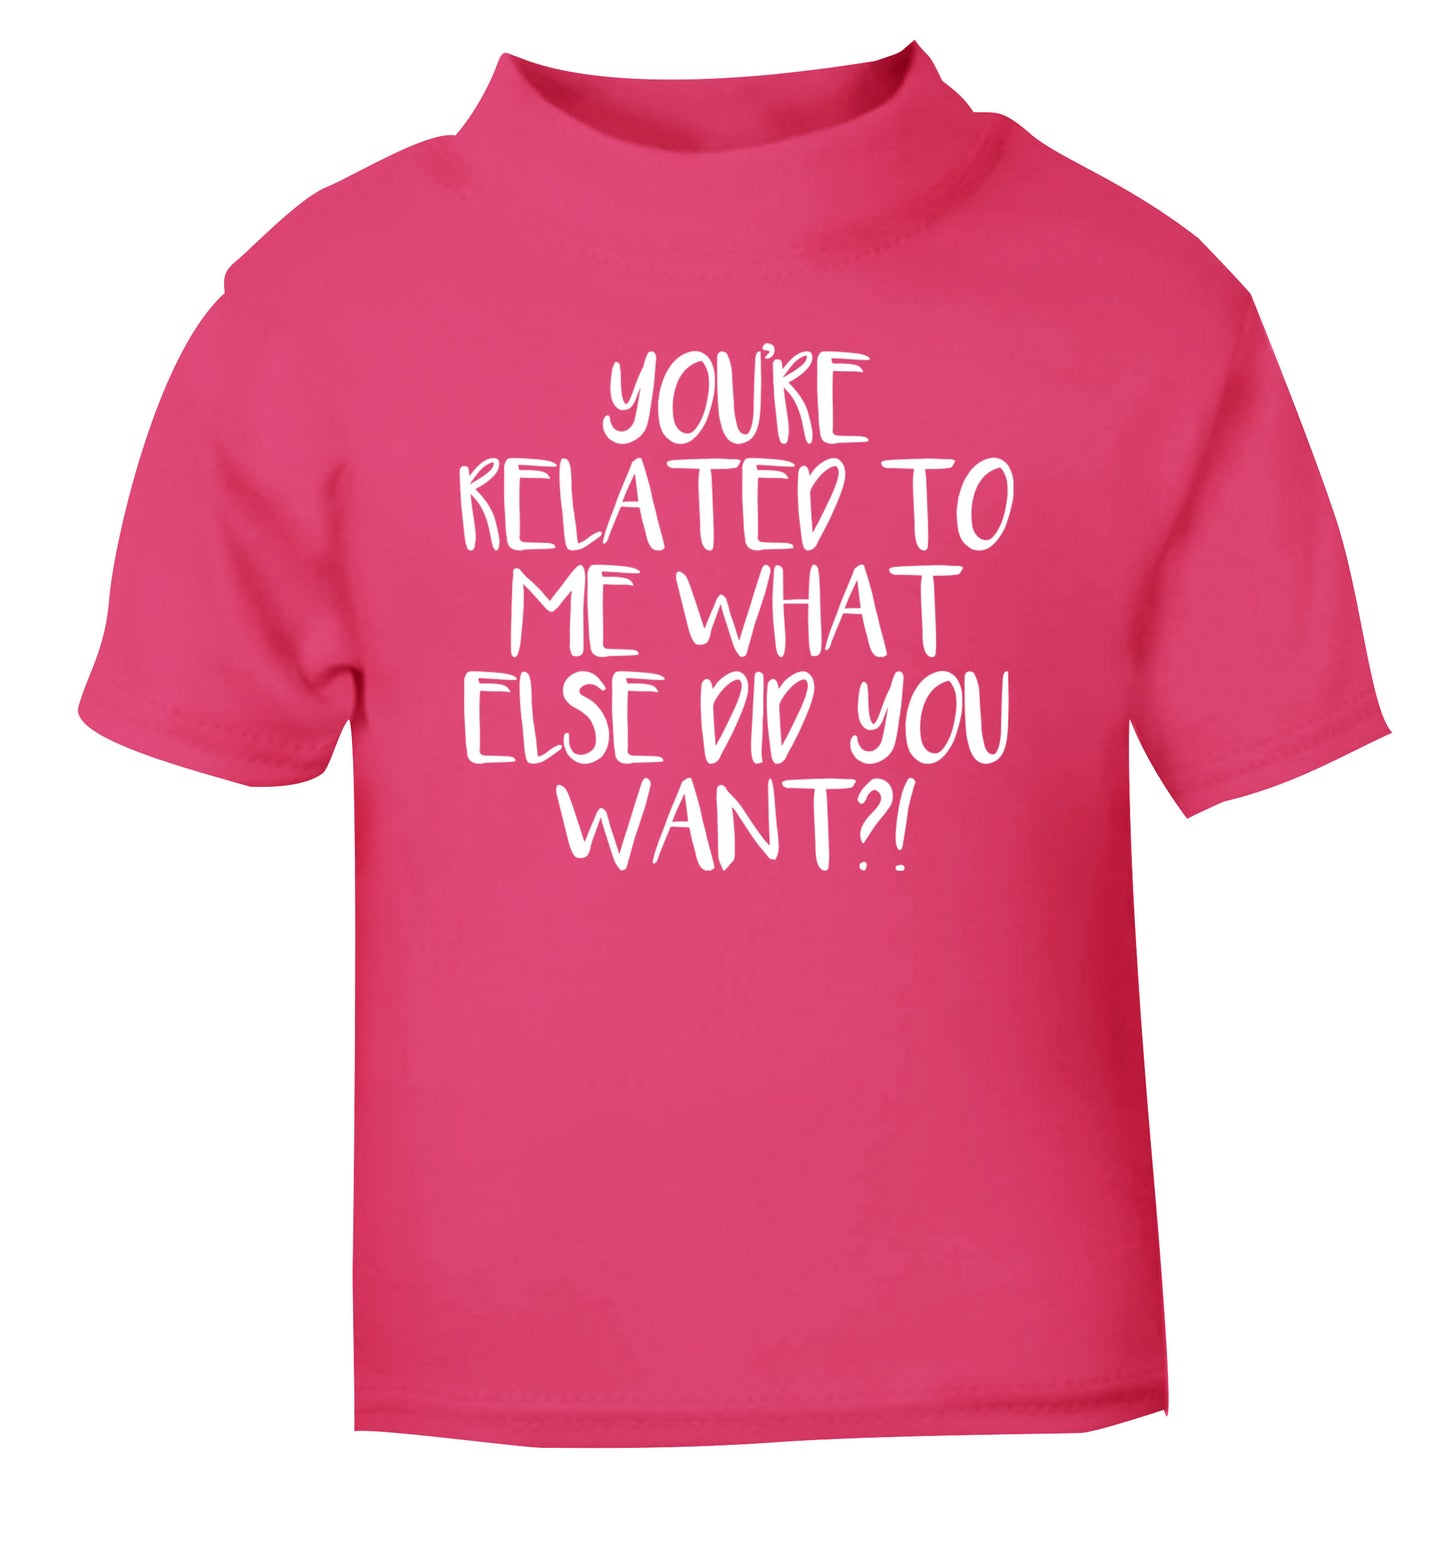 You're related to me what more do you want? pink Baby Toddler Tshirt 2 Years